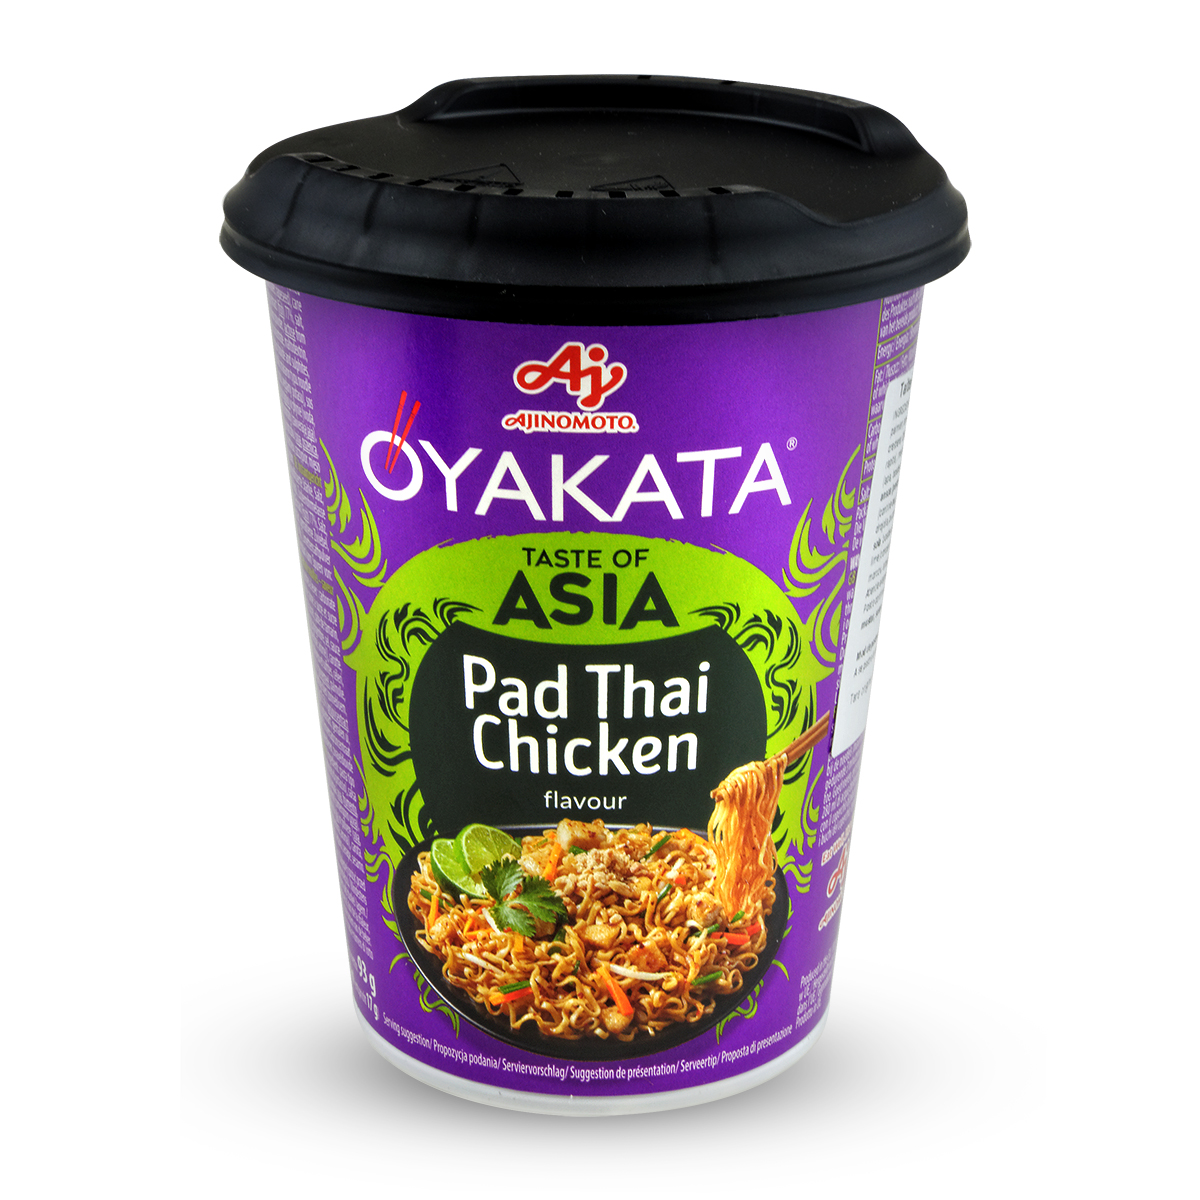 Supe instant la CUP/BOWL - Taitei instant Pad Thai Chicken CUP OYAKATA 93g, asianfood.ro